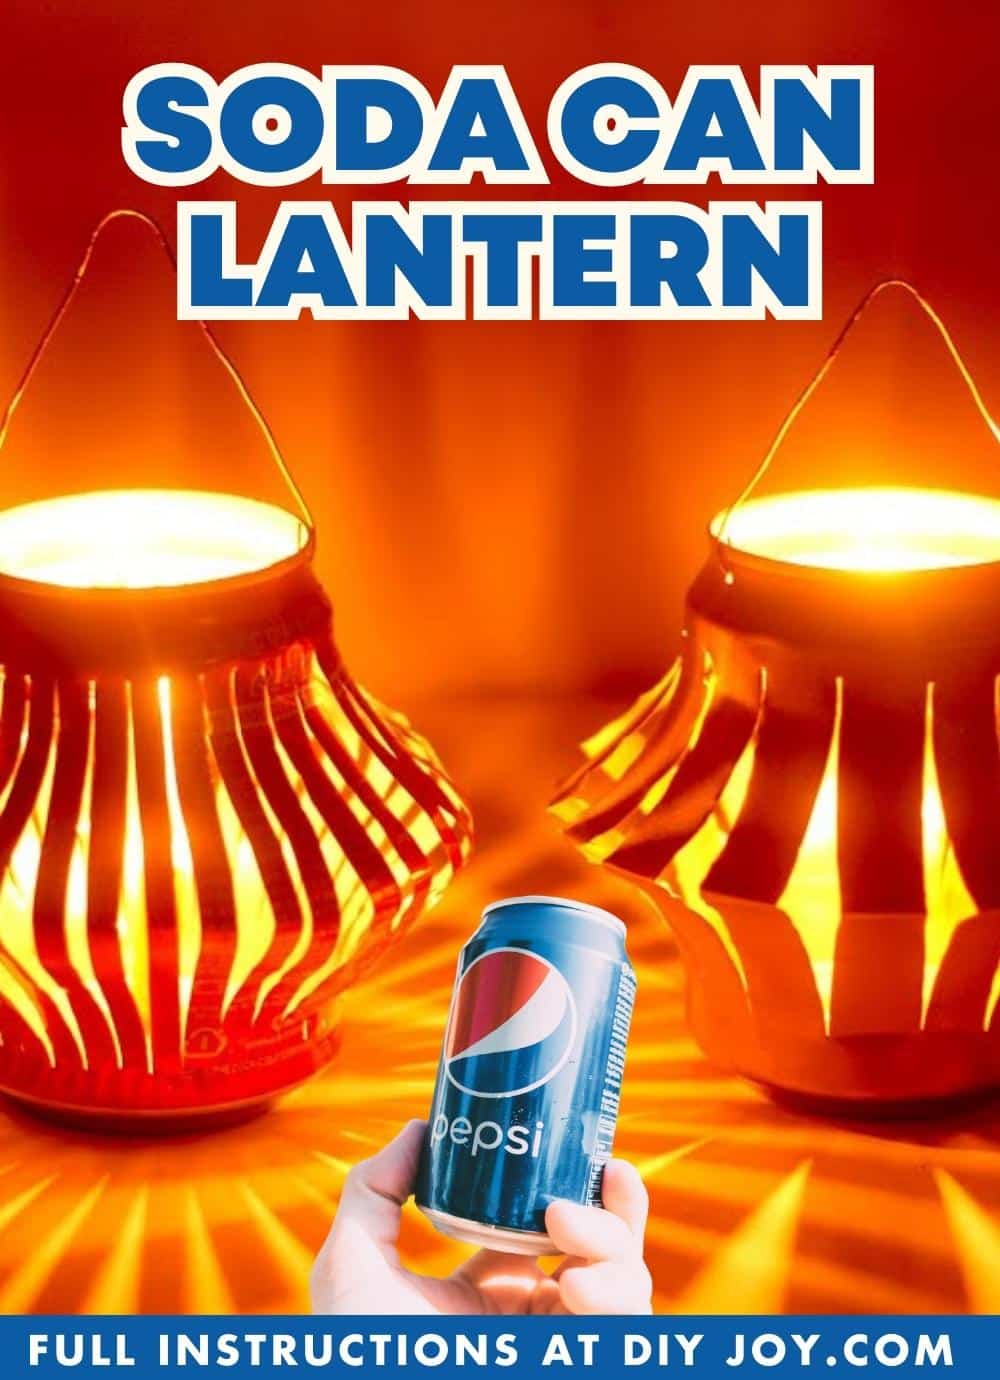 How to Make a Lantern From a Soda Can